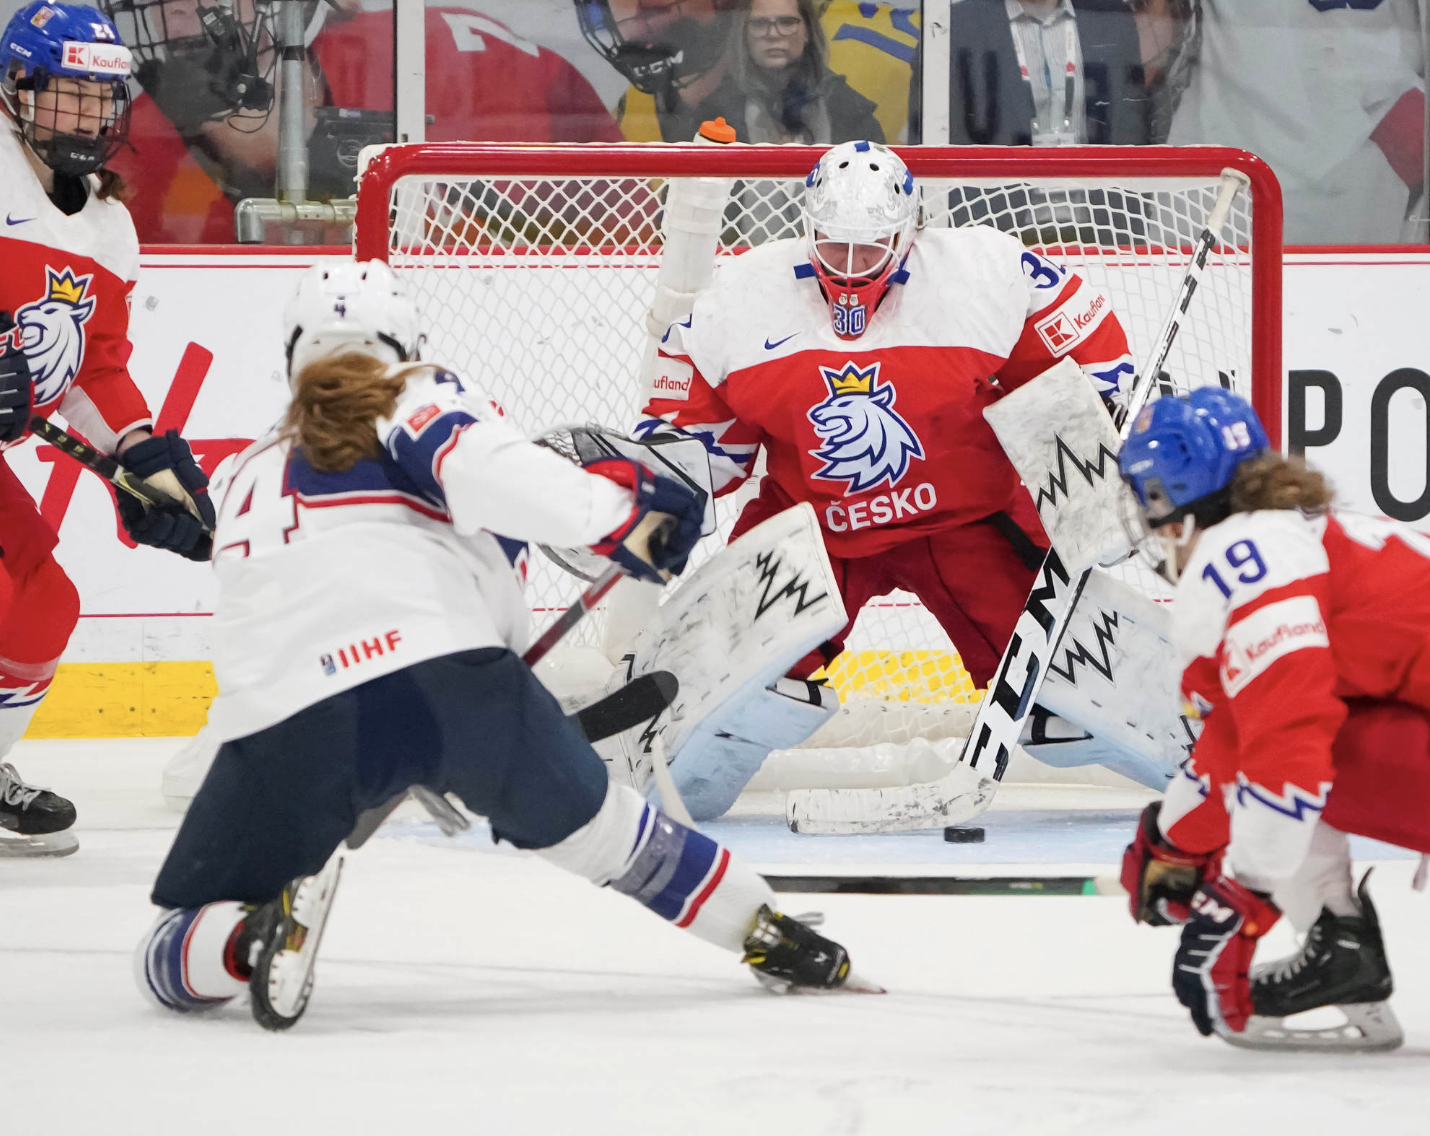 Harvey takes a shot on Zechovská. Harvey is on her knee following the shot, while Zechovská is dropping down to hers while making the save. Two Czech defenders are visible on the edges of the photo. Harvey is wearing white, while all the Czechs are in red.